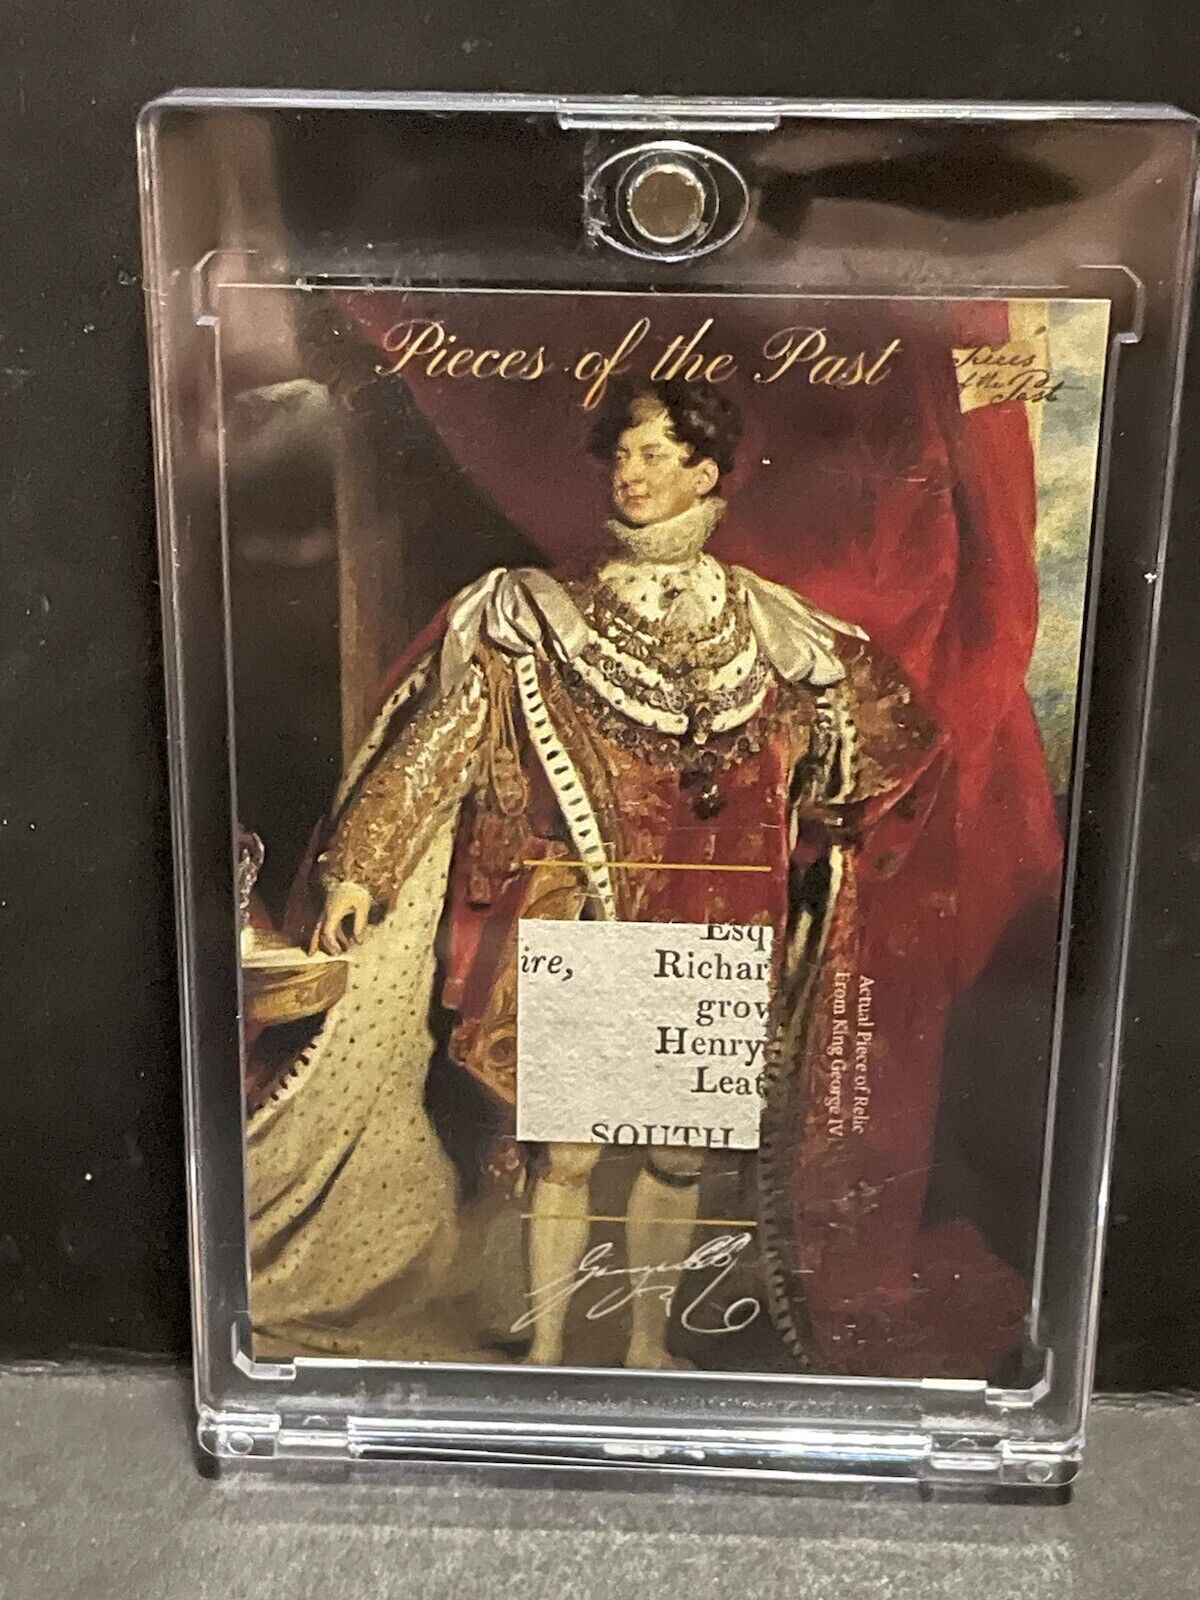 2018 Pieces Of The Past Relic Card King George IV PR-KGIV33